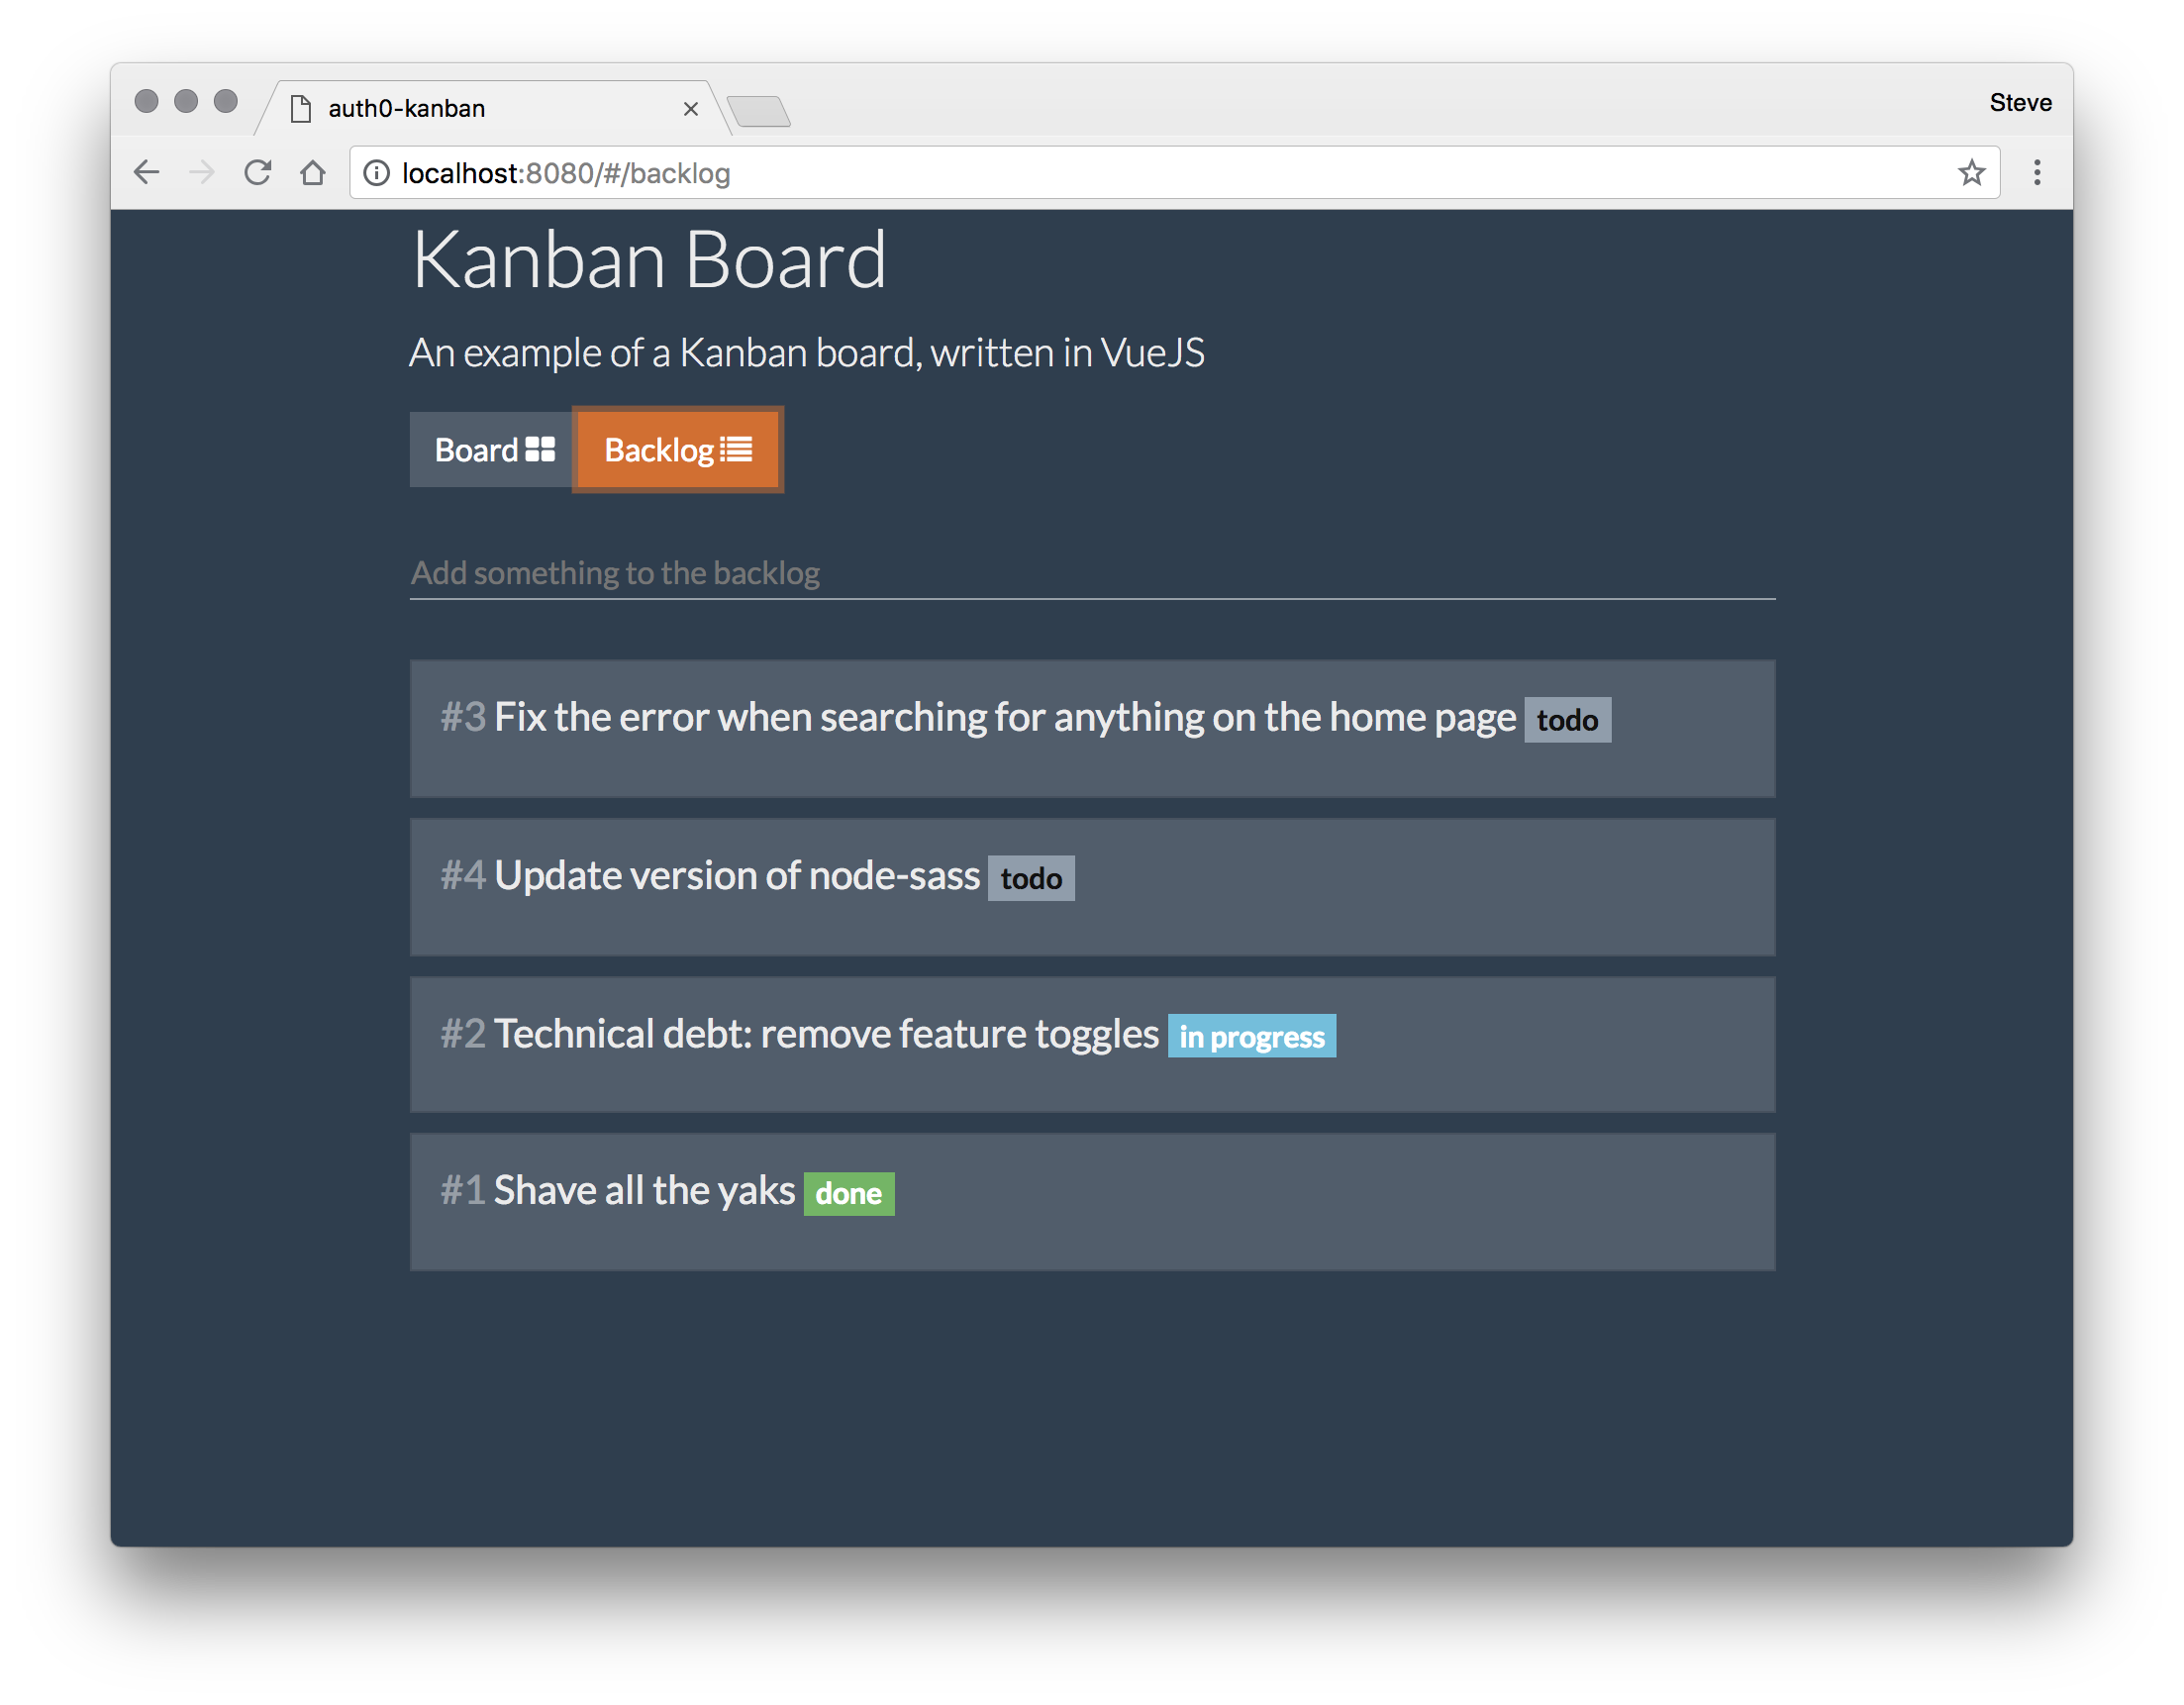 Preview of the Kanban Board application